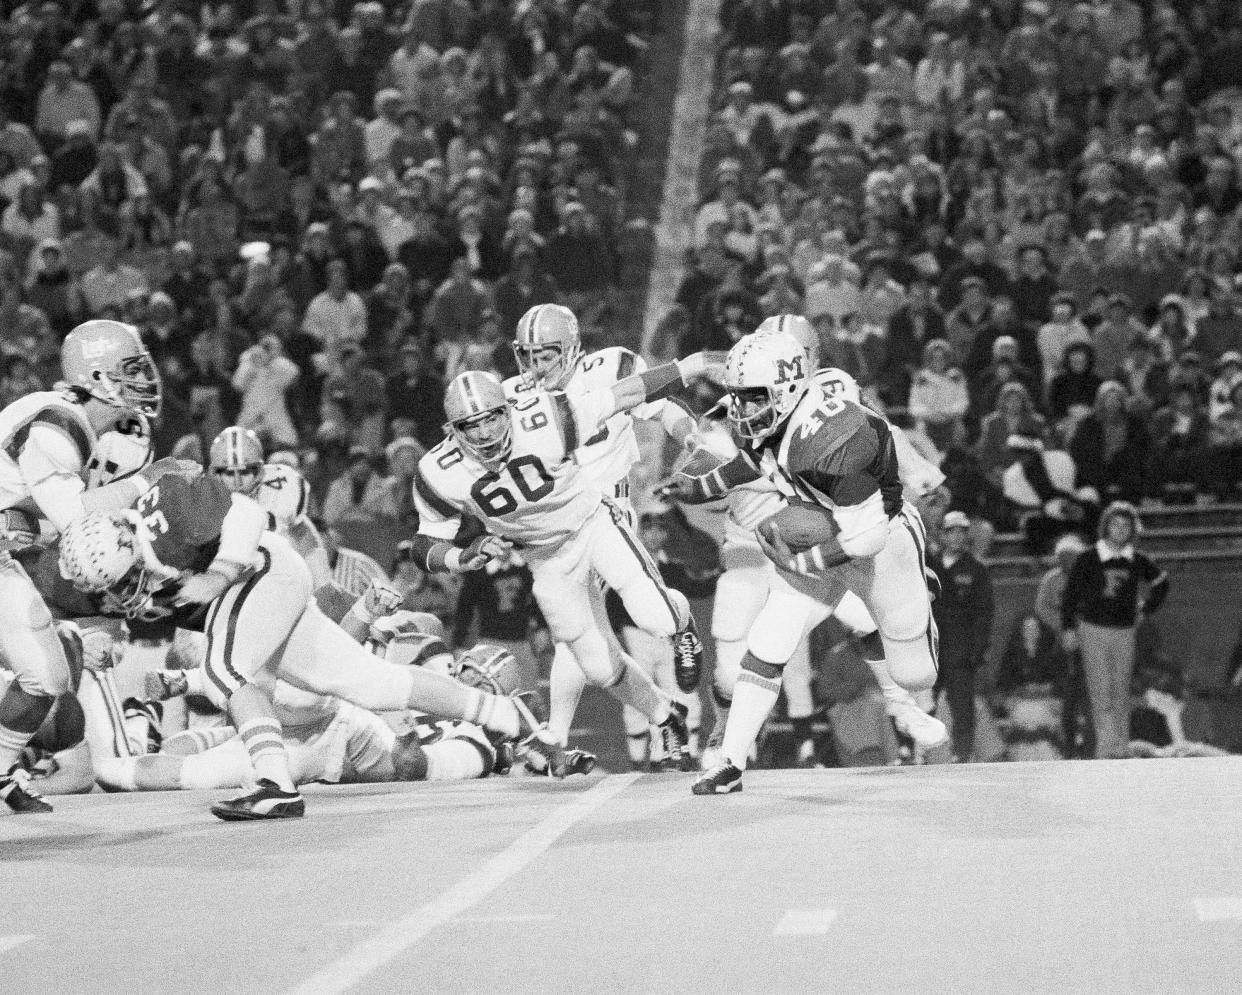 Miami of Ohio tailback Bob Hitchens (40) evades University of Florida defender John Lancer (60) to gain a first-quarter first down in the Tangerine Bowl, Dec. 22, 1973, Gainesville, Fla.